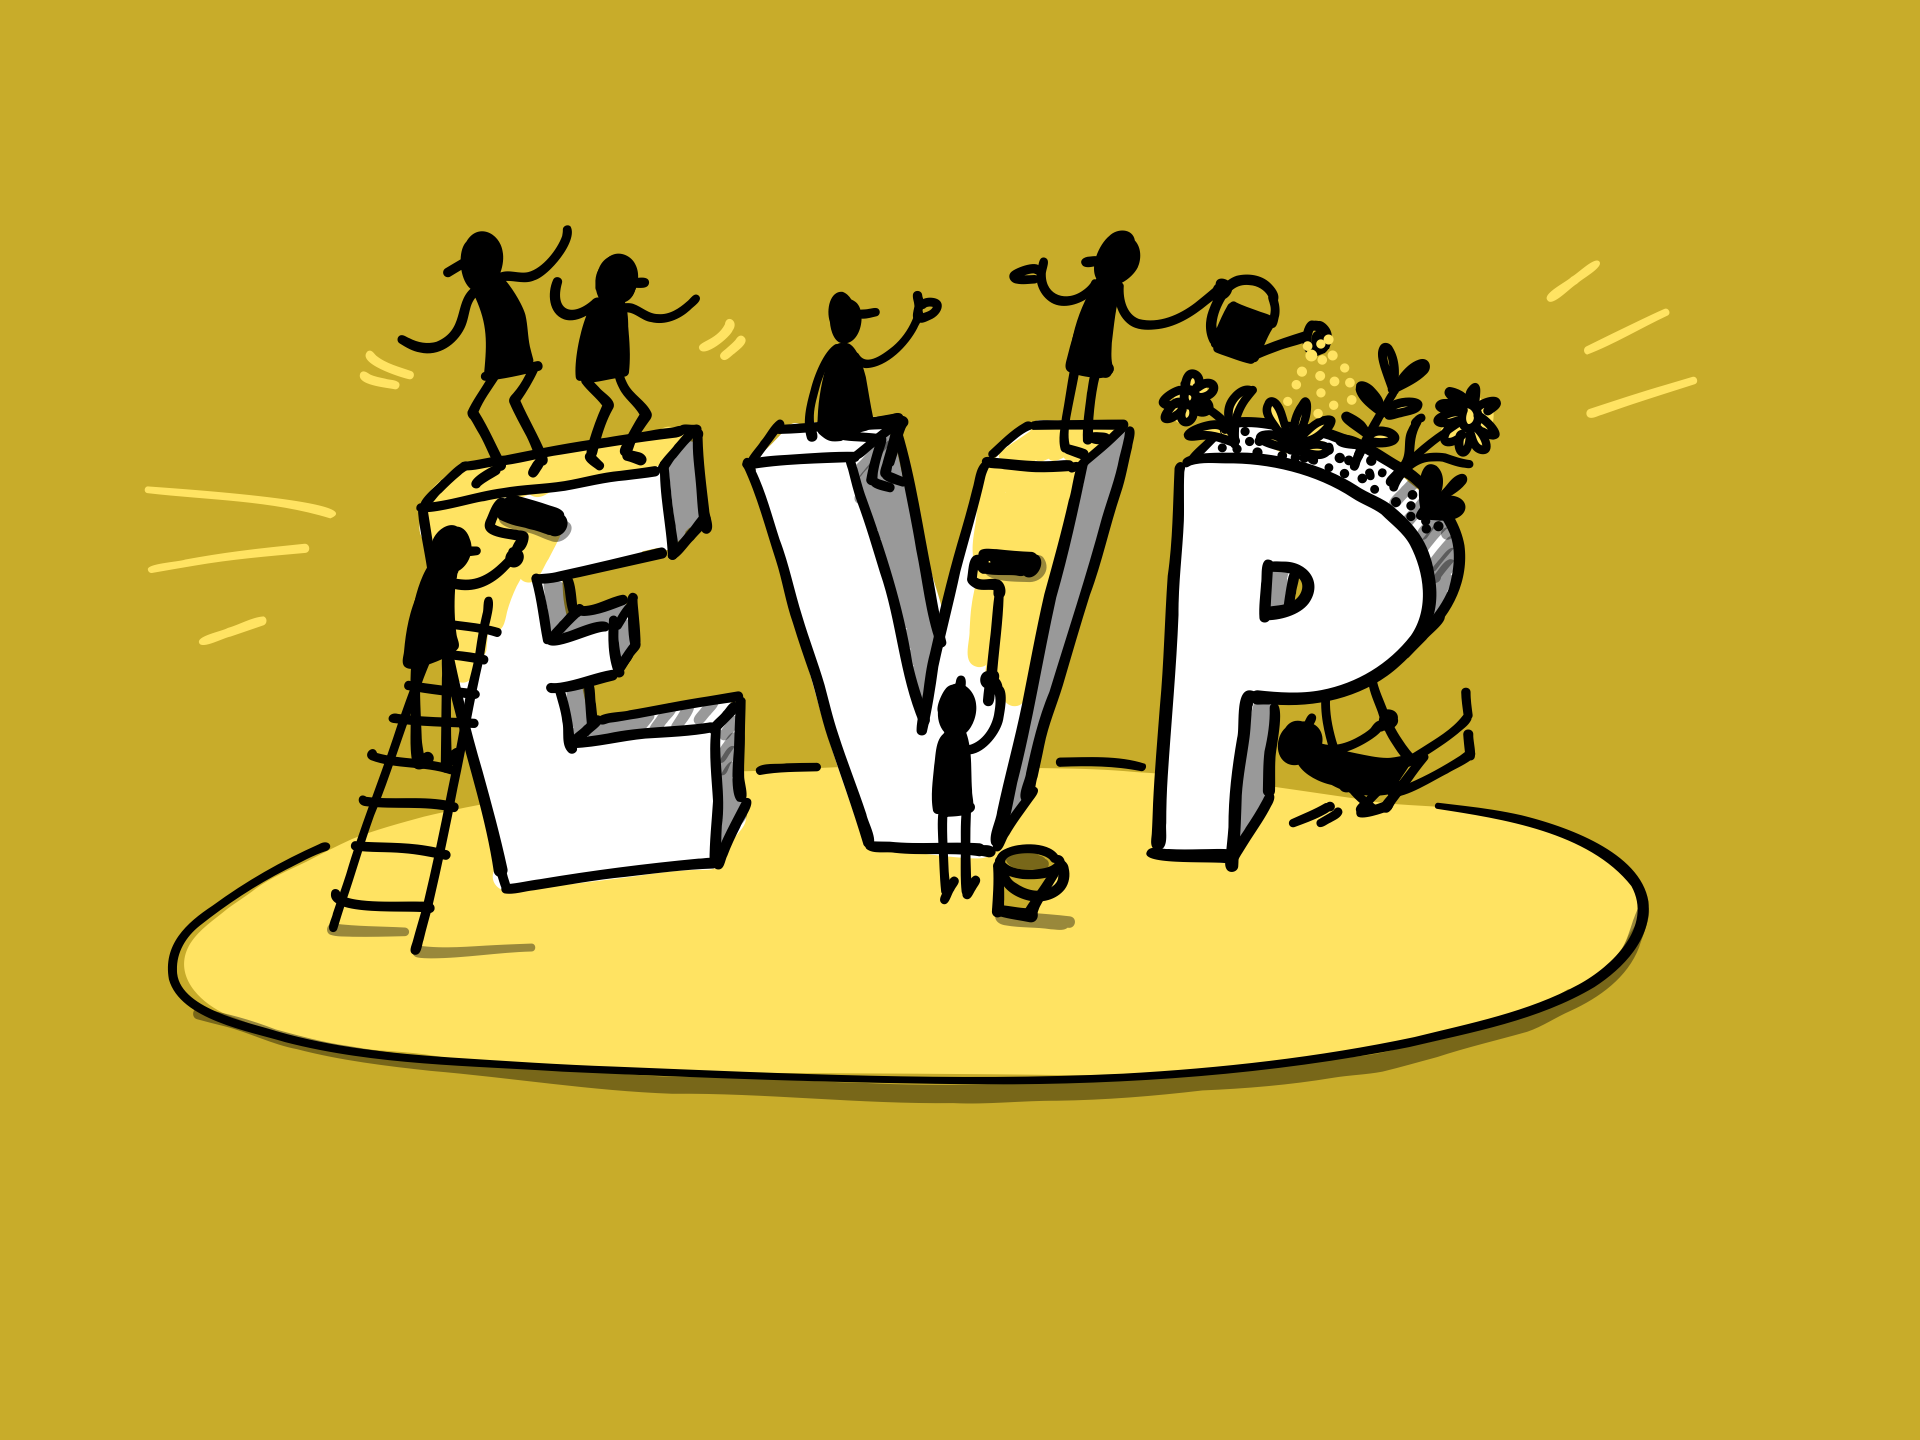 EVP is represented by large three-dimensional letters in a circular space. Small characters are enjoying themselves and decorating the letters.